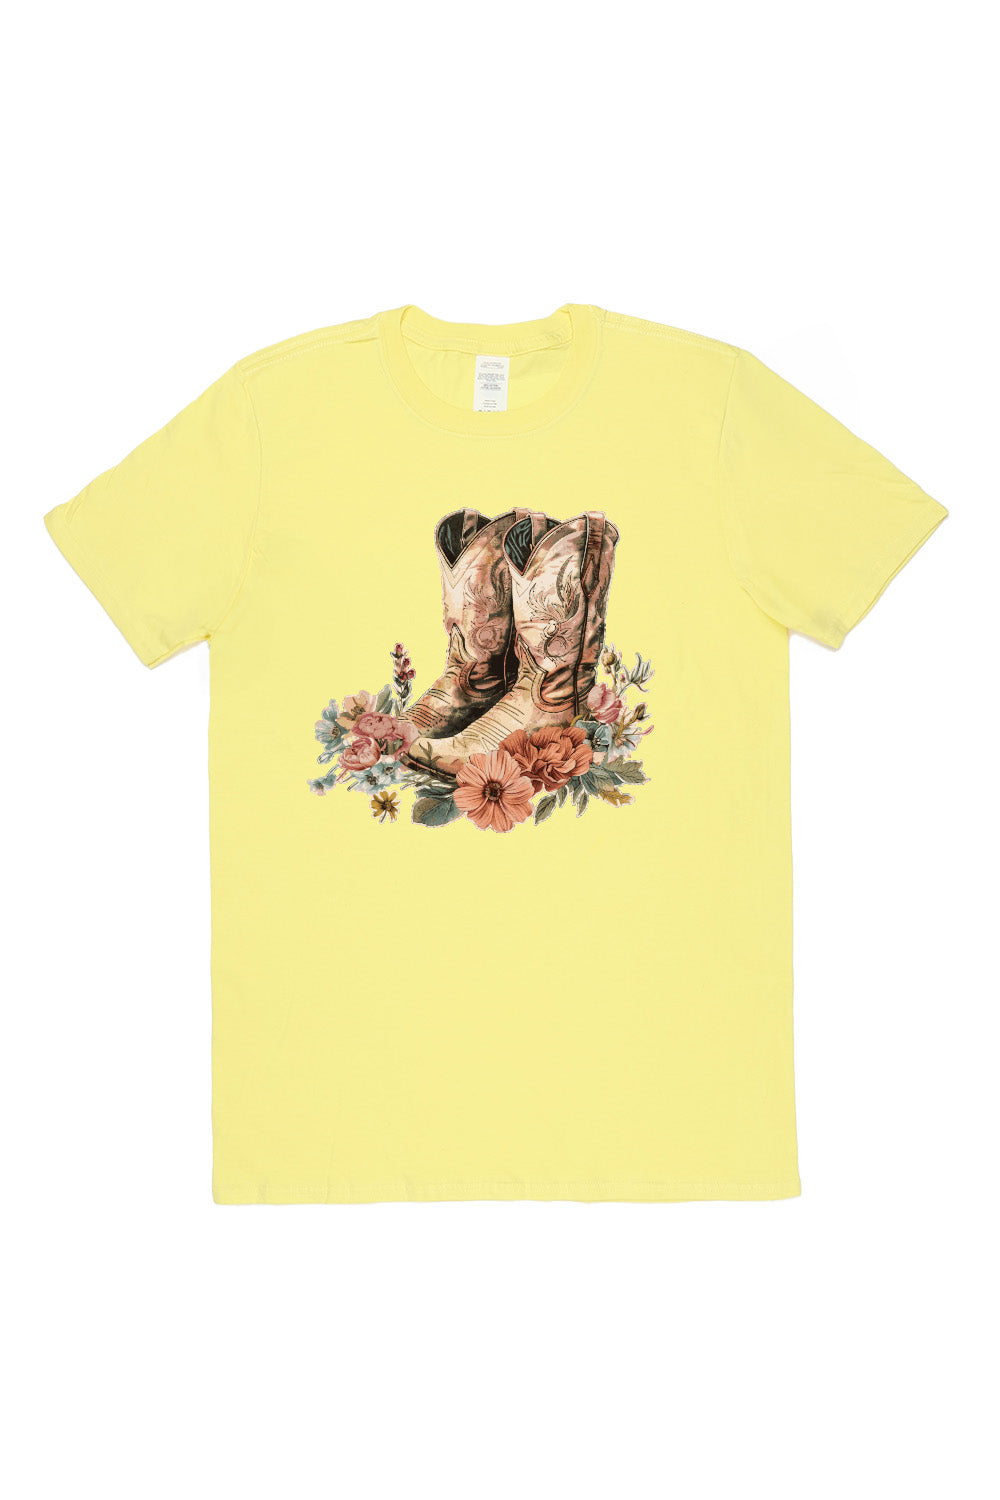 Cowboy boots with flowers T-Shirt in Yellow (Custom Packs)